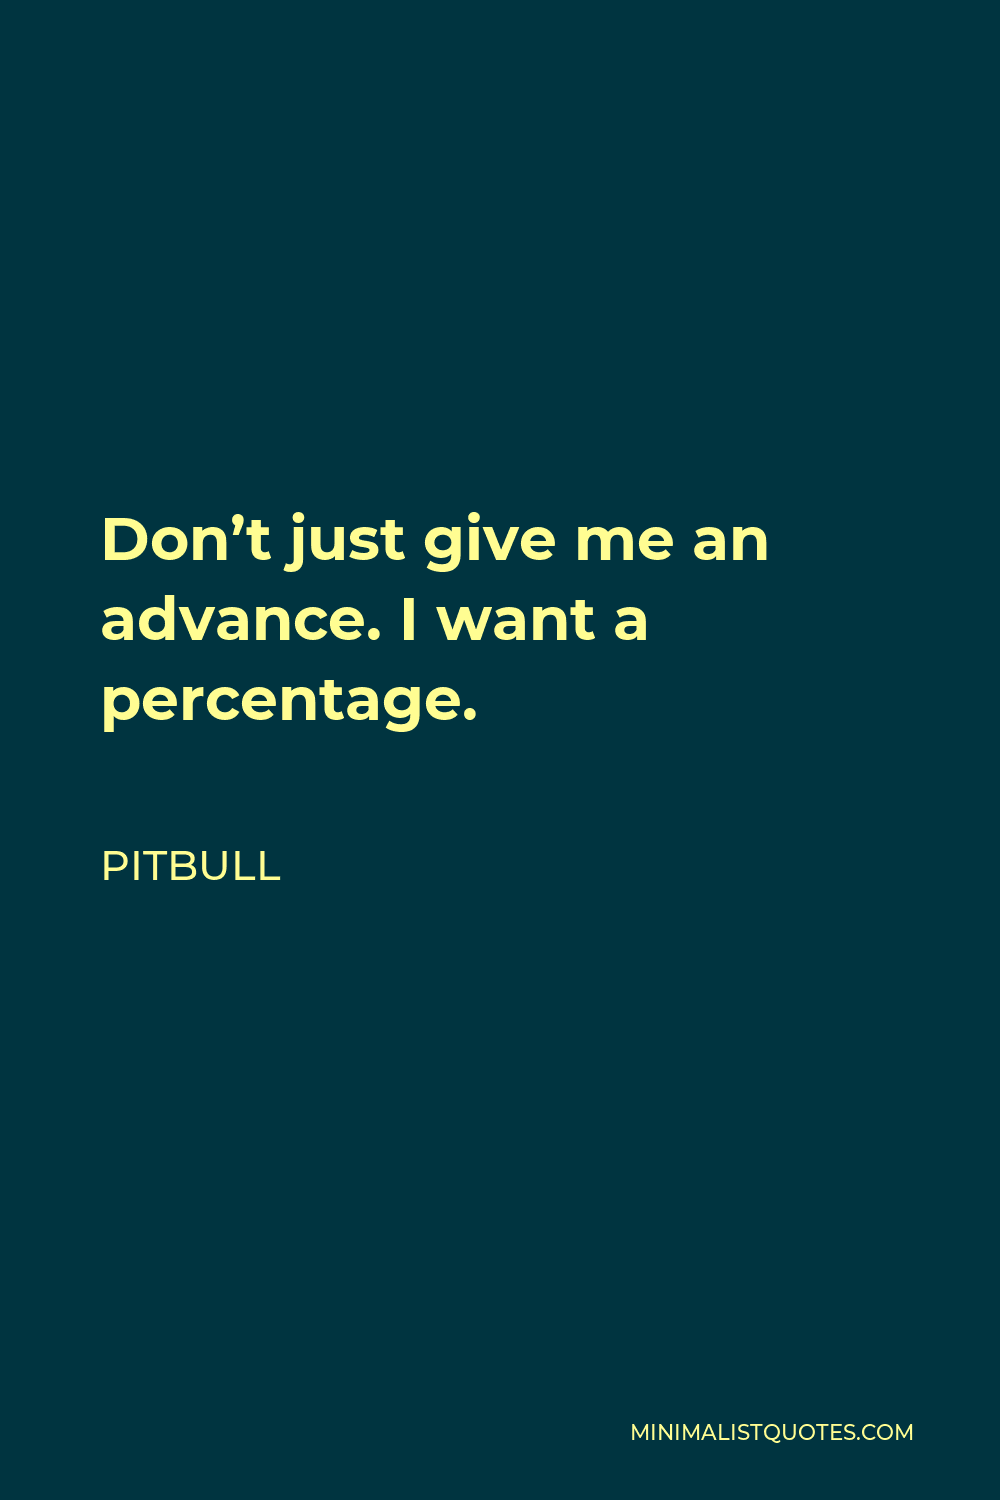 Pitbull Quote - Don’t just give me an advance. I want a percentage.